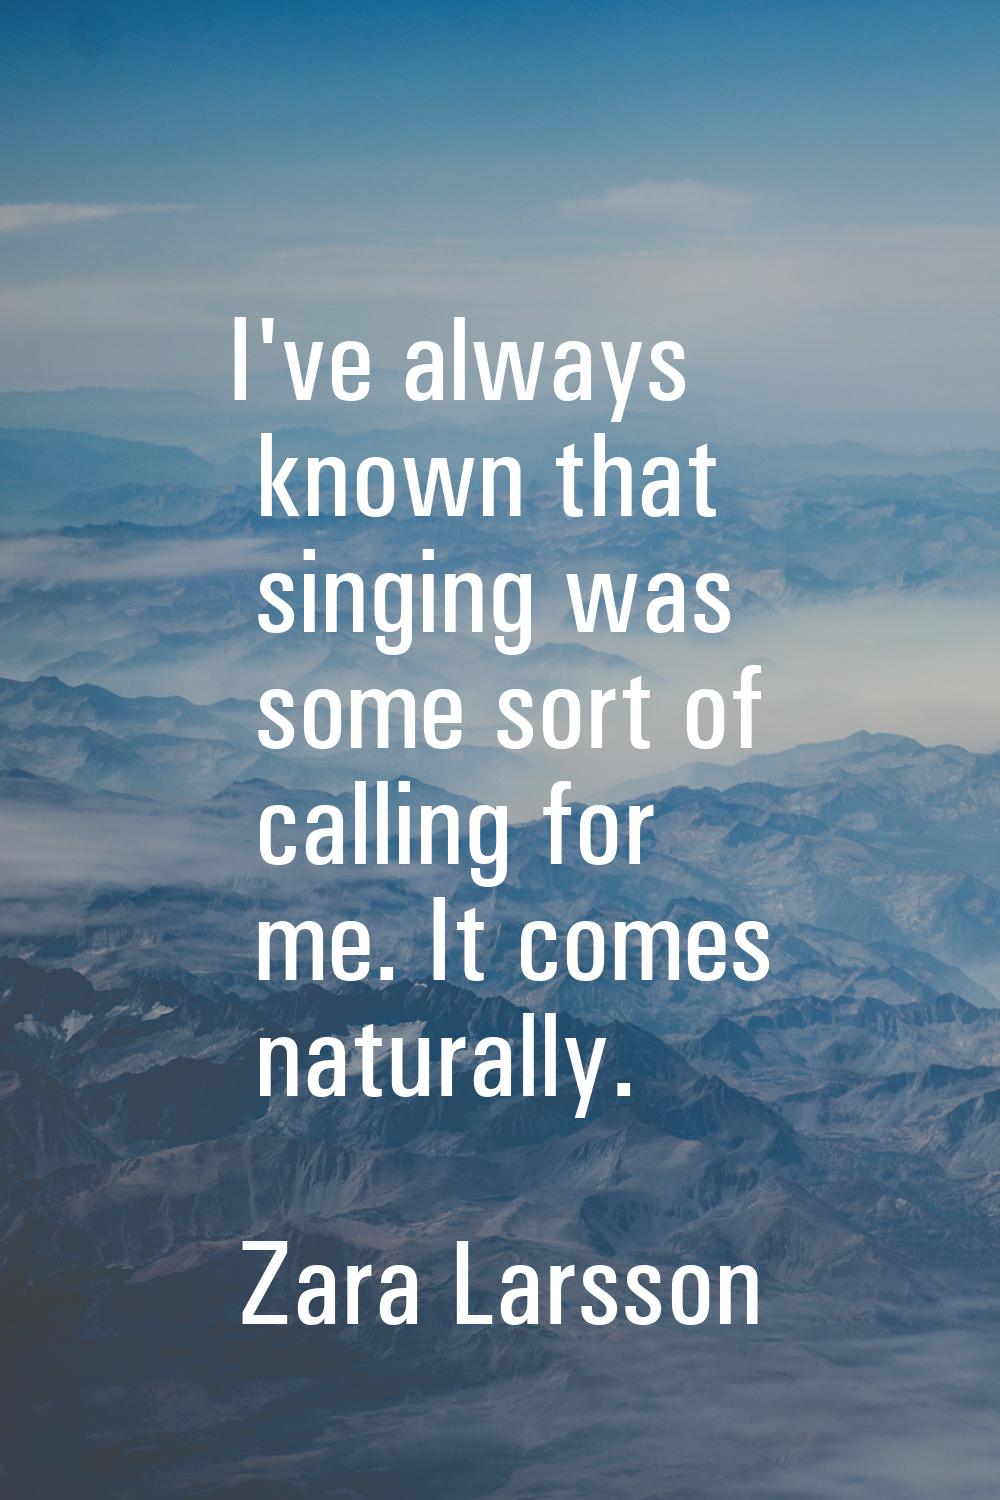 I've always known that singing was some sort of calling for me. It comes naturally.